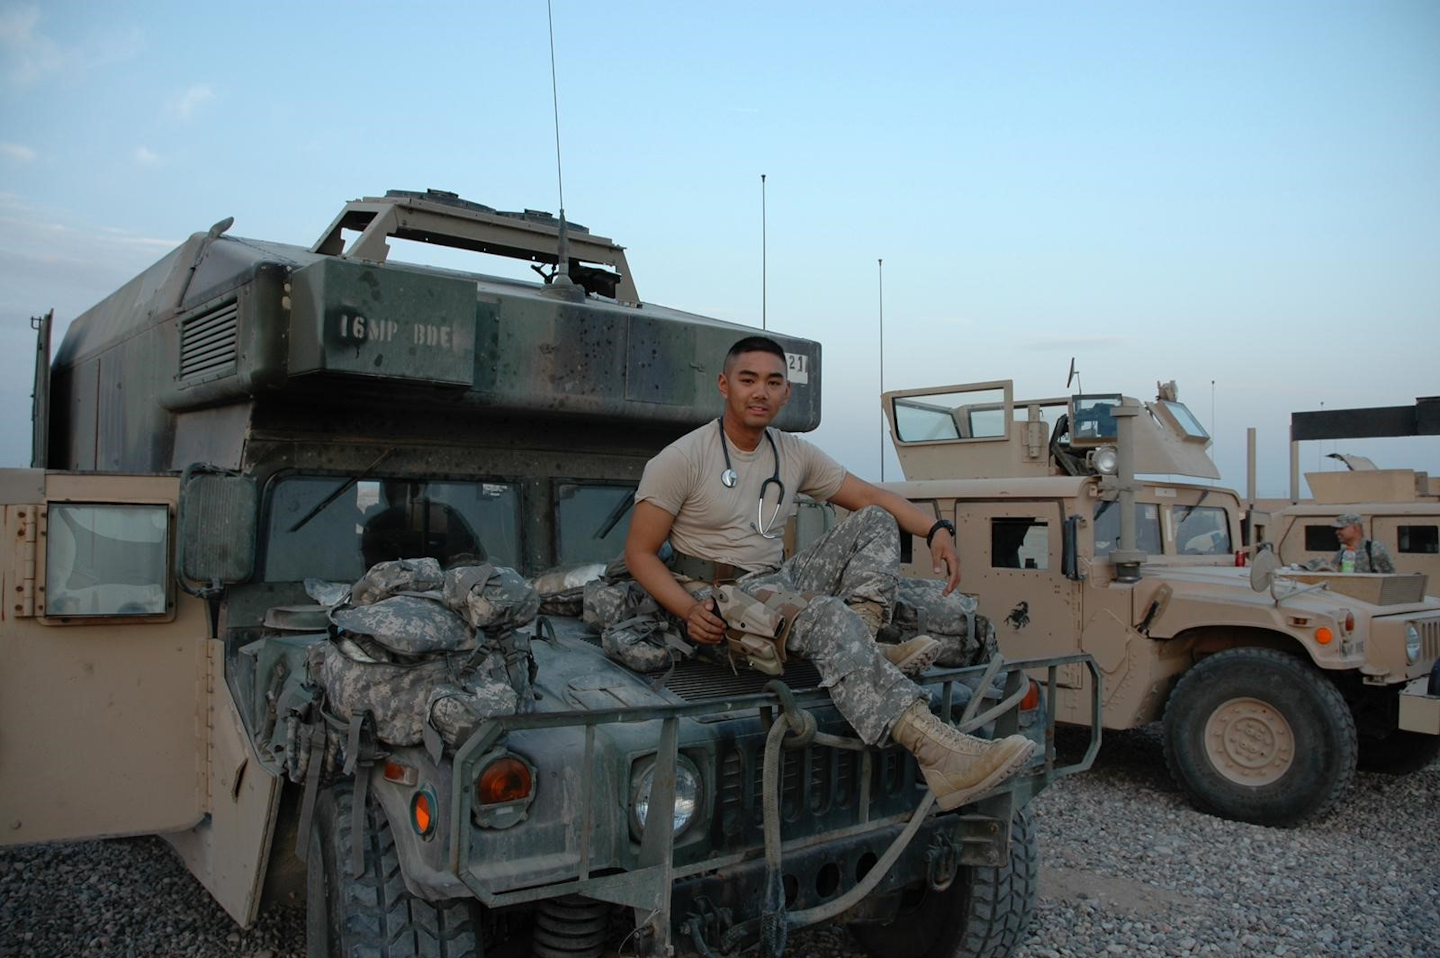 Mike Flores joined the Army National Guard in 2003 as a medic. He says he was motivated by the desire to save lives.